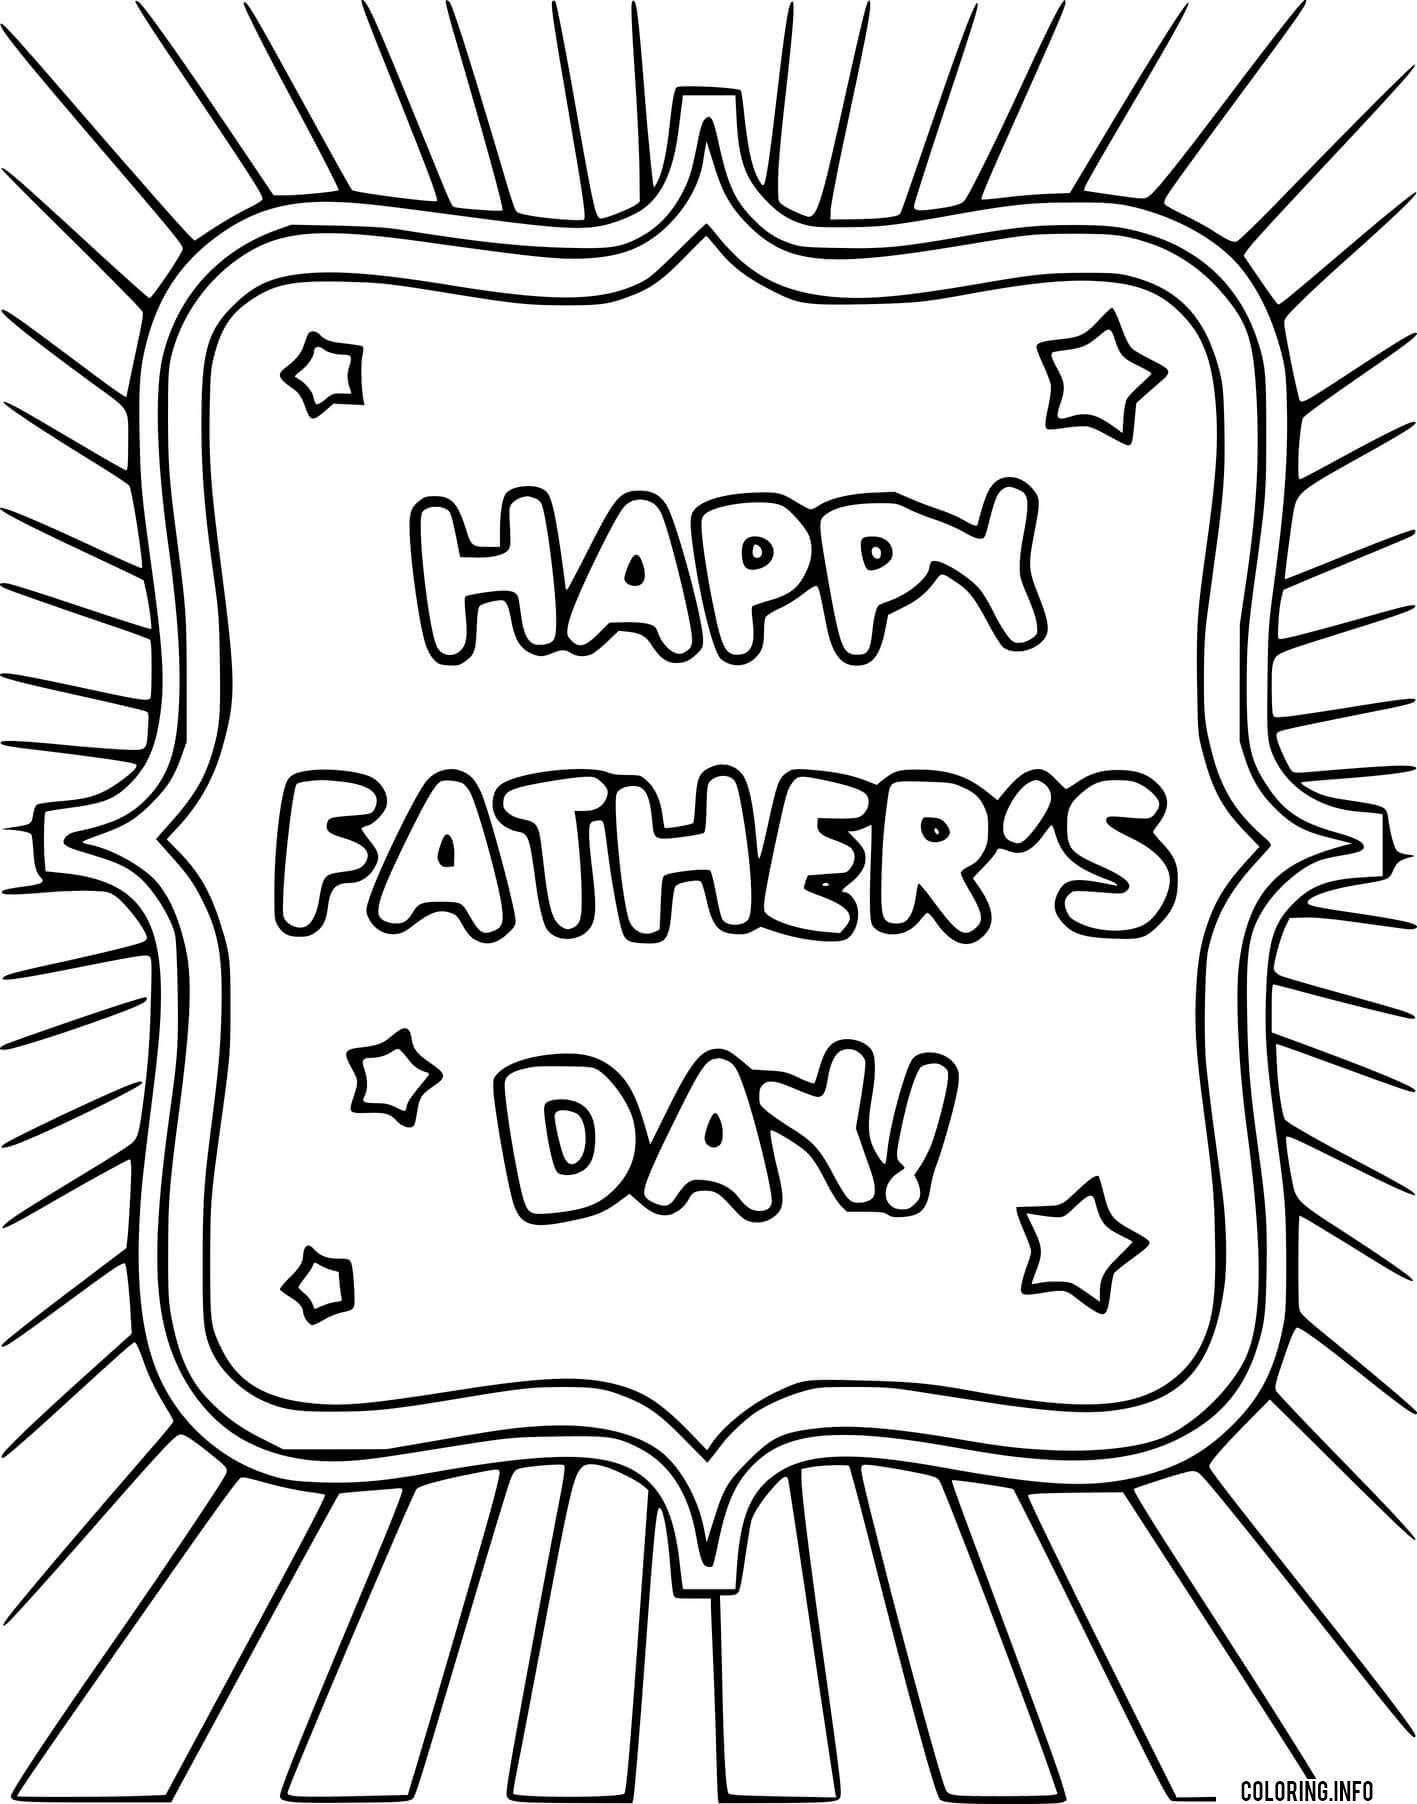 Happy Fathers Day With Stars coloring